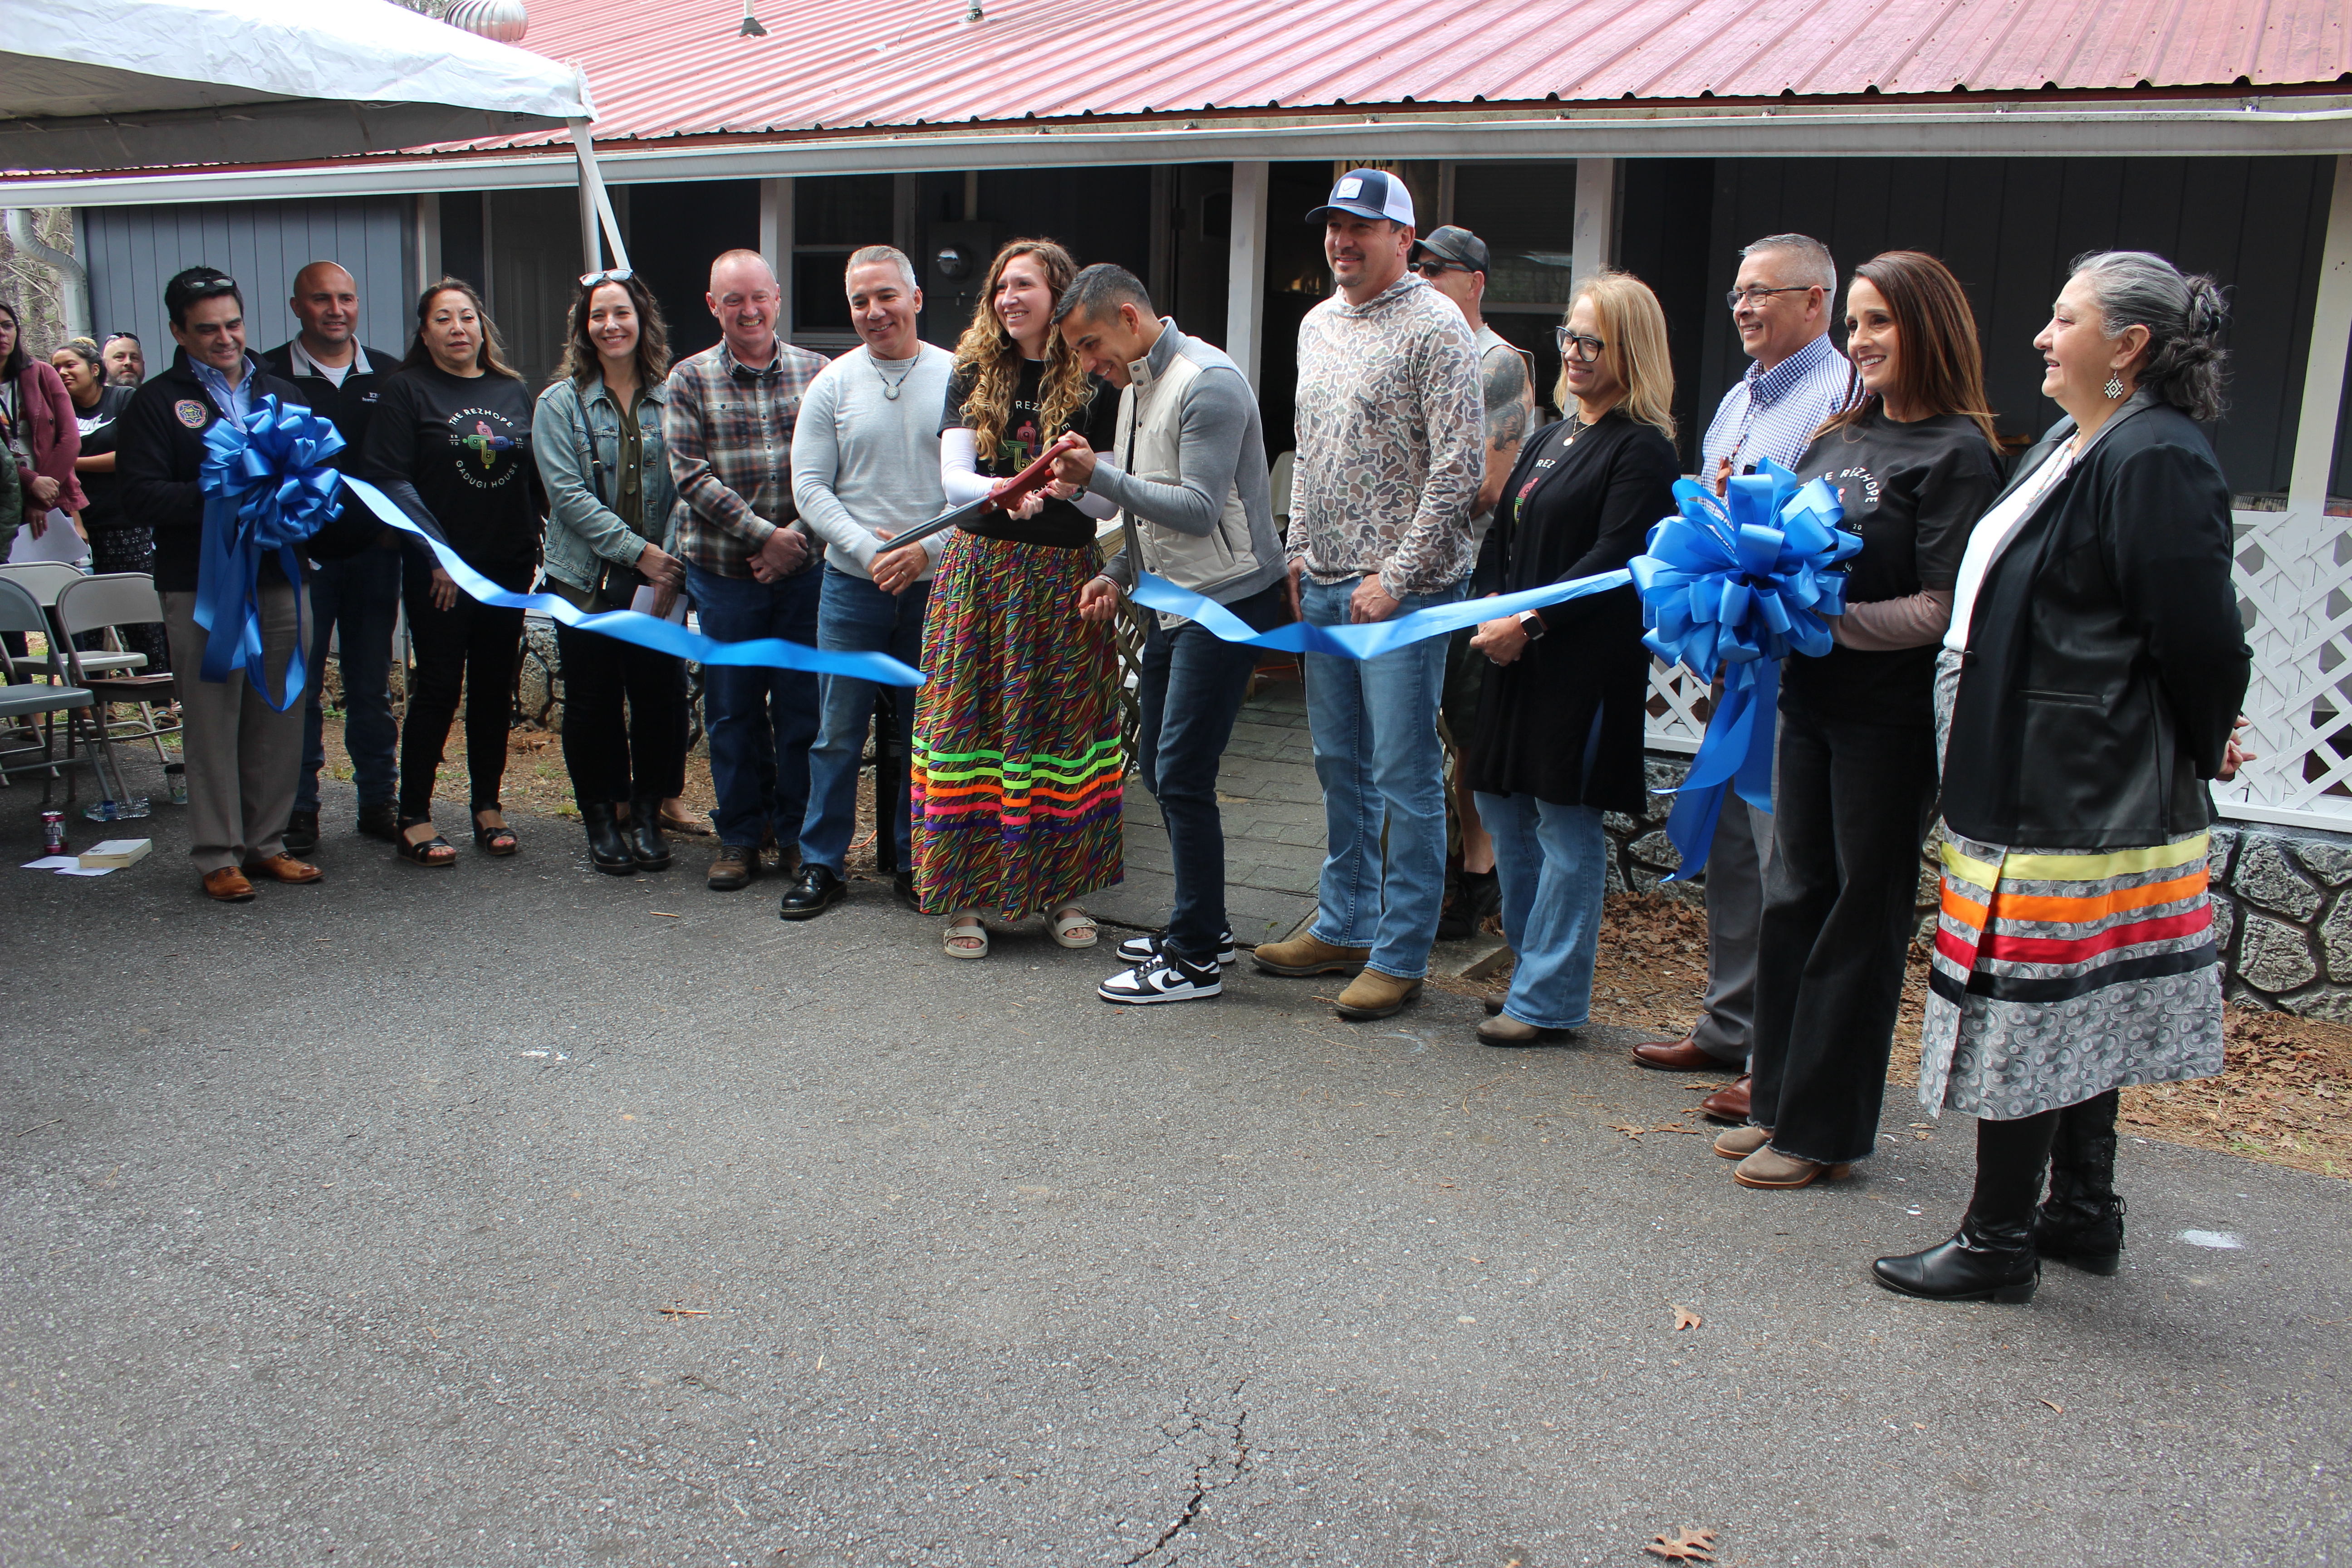 RezHOPE founder Kallup McCoy II and executive director Katelynn Ledford-McCoy are surrounded by board members and tribal leaders for a ribbon cutting ceremony for The Gadugi House, a men’s transitional living house.